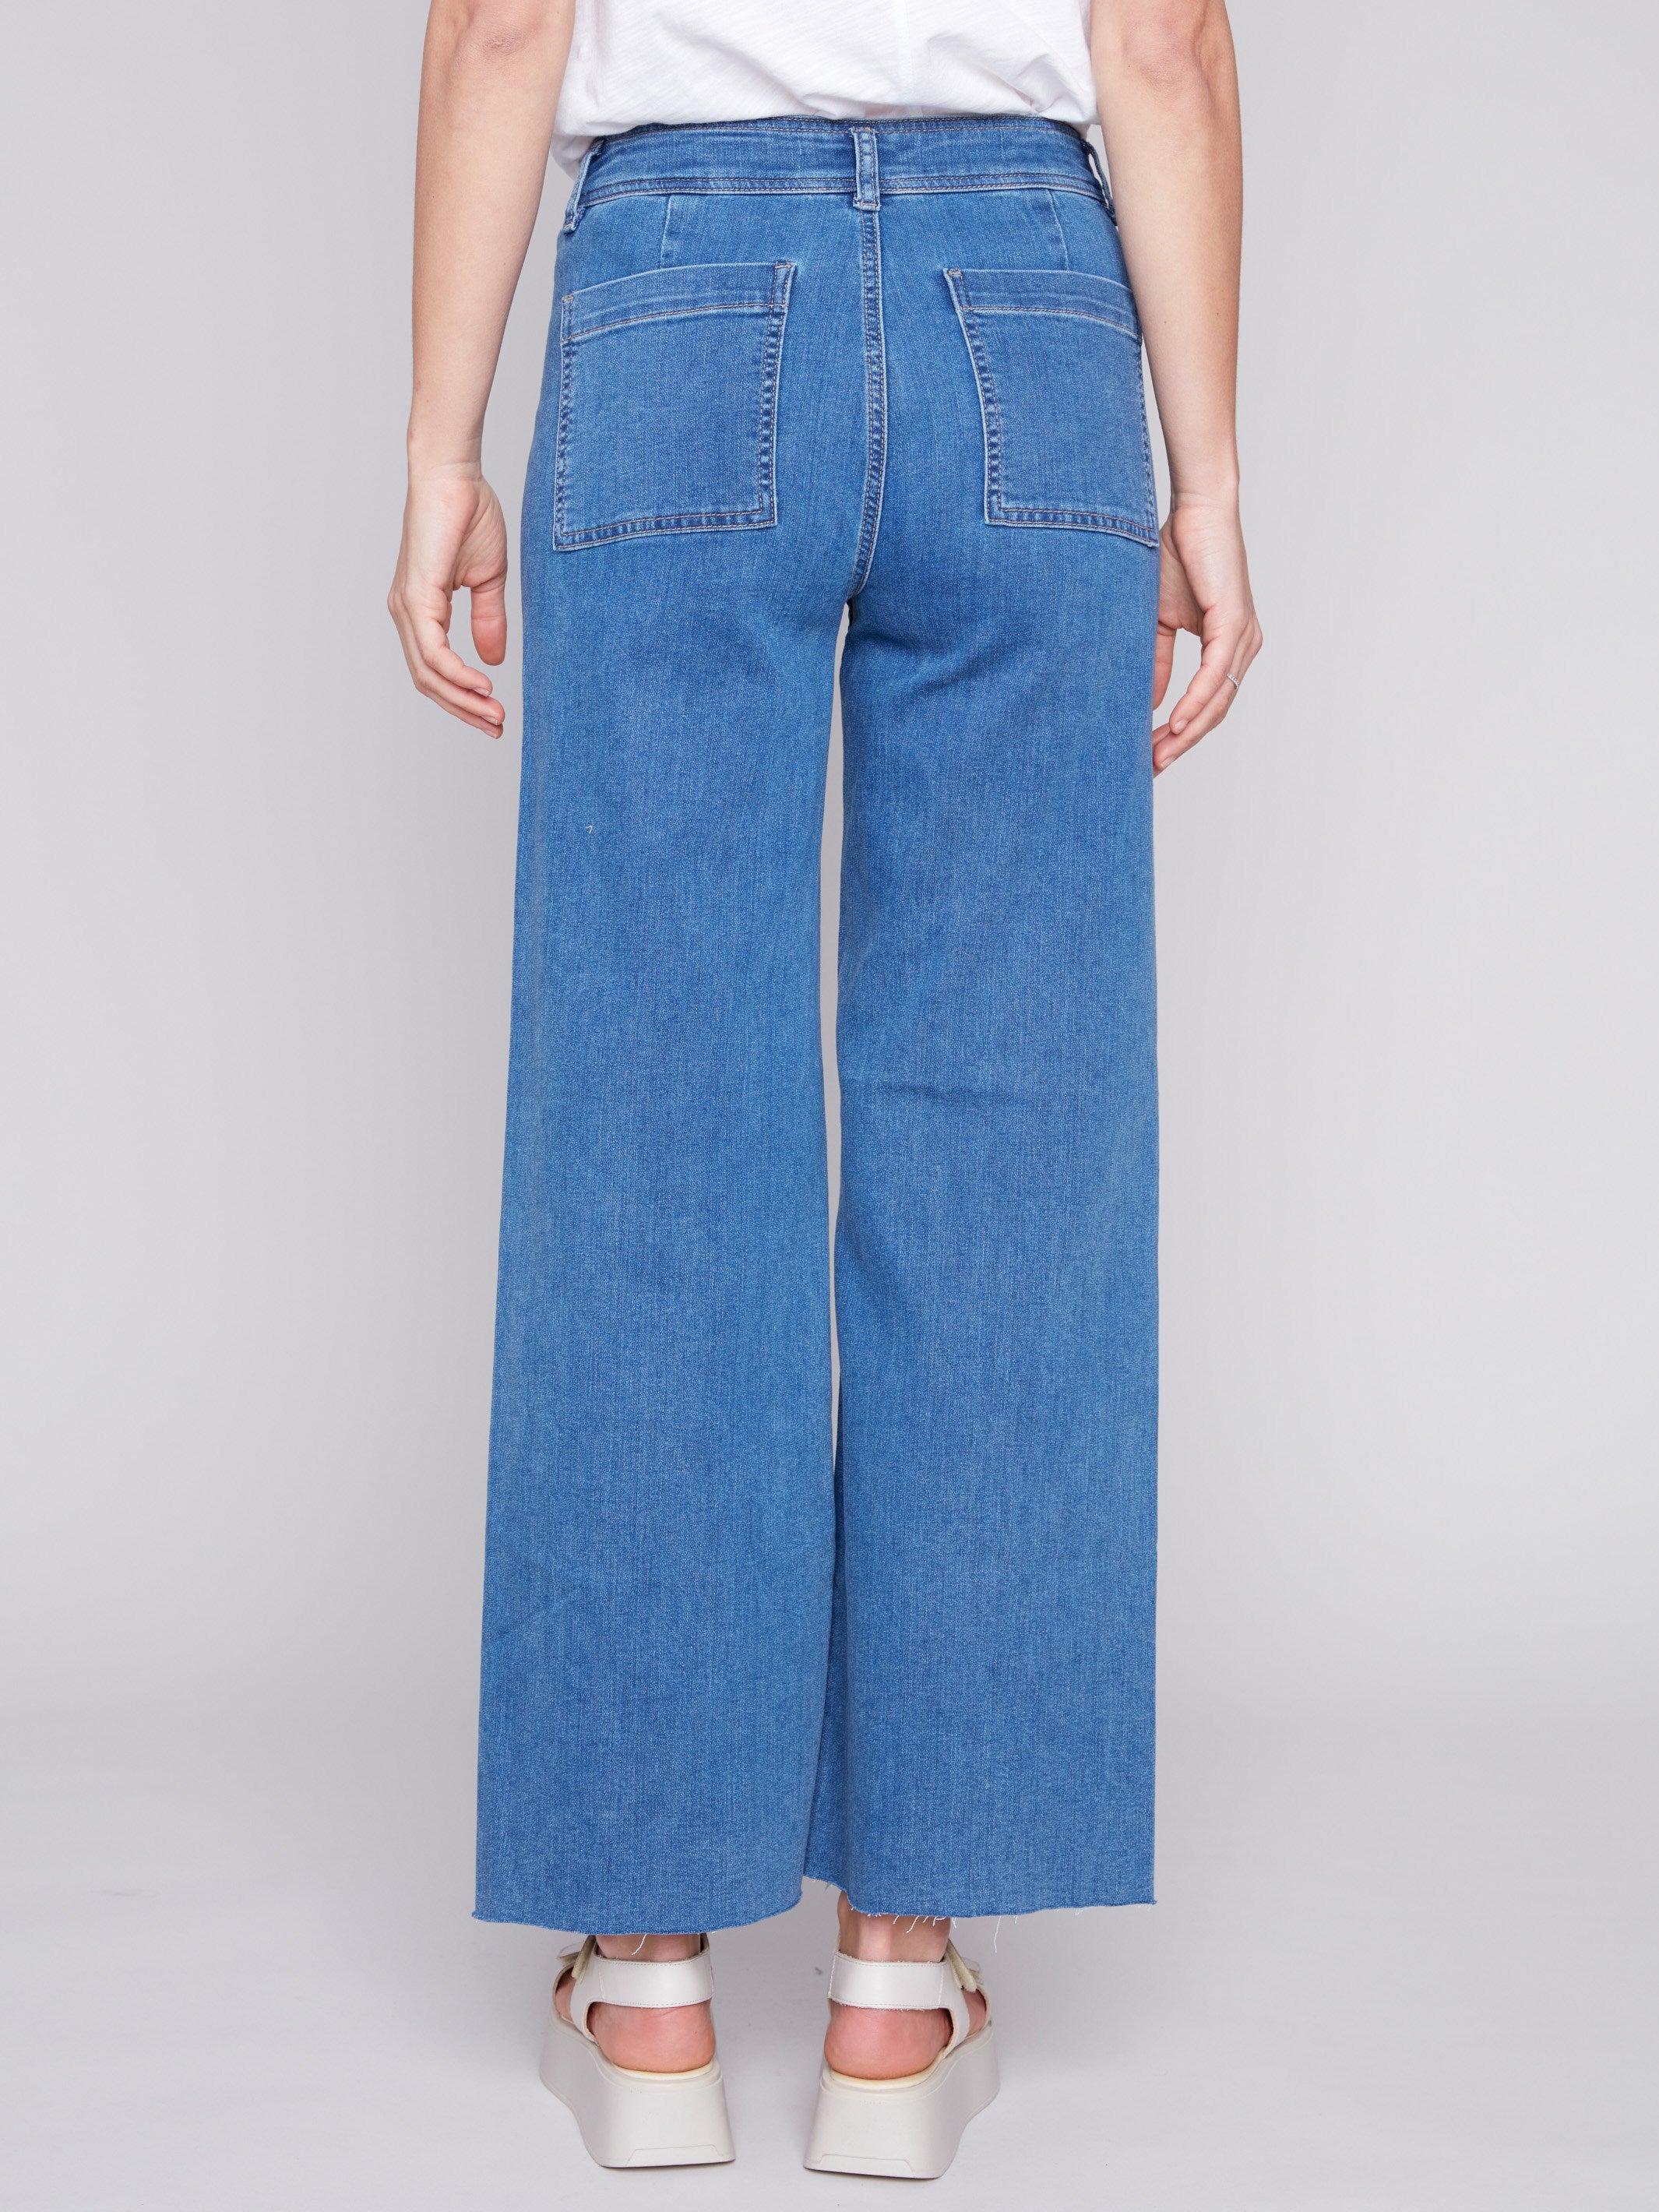 Wide Leg Jeans with Raw Hem - Medium Blue - Charlie B Collection Canada - Image 3